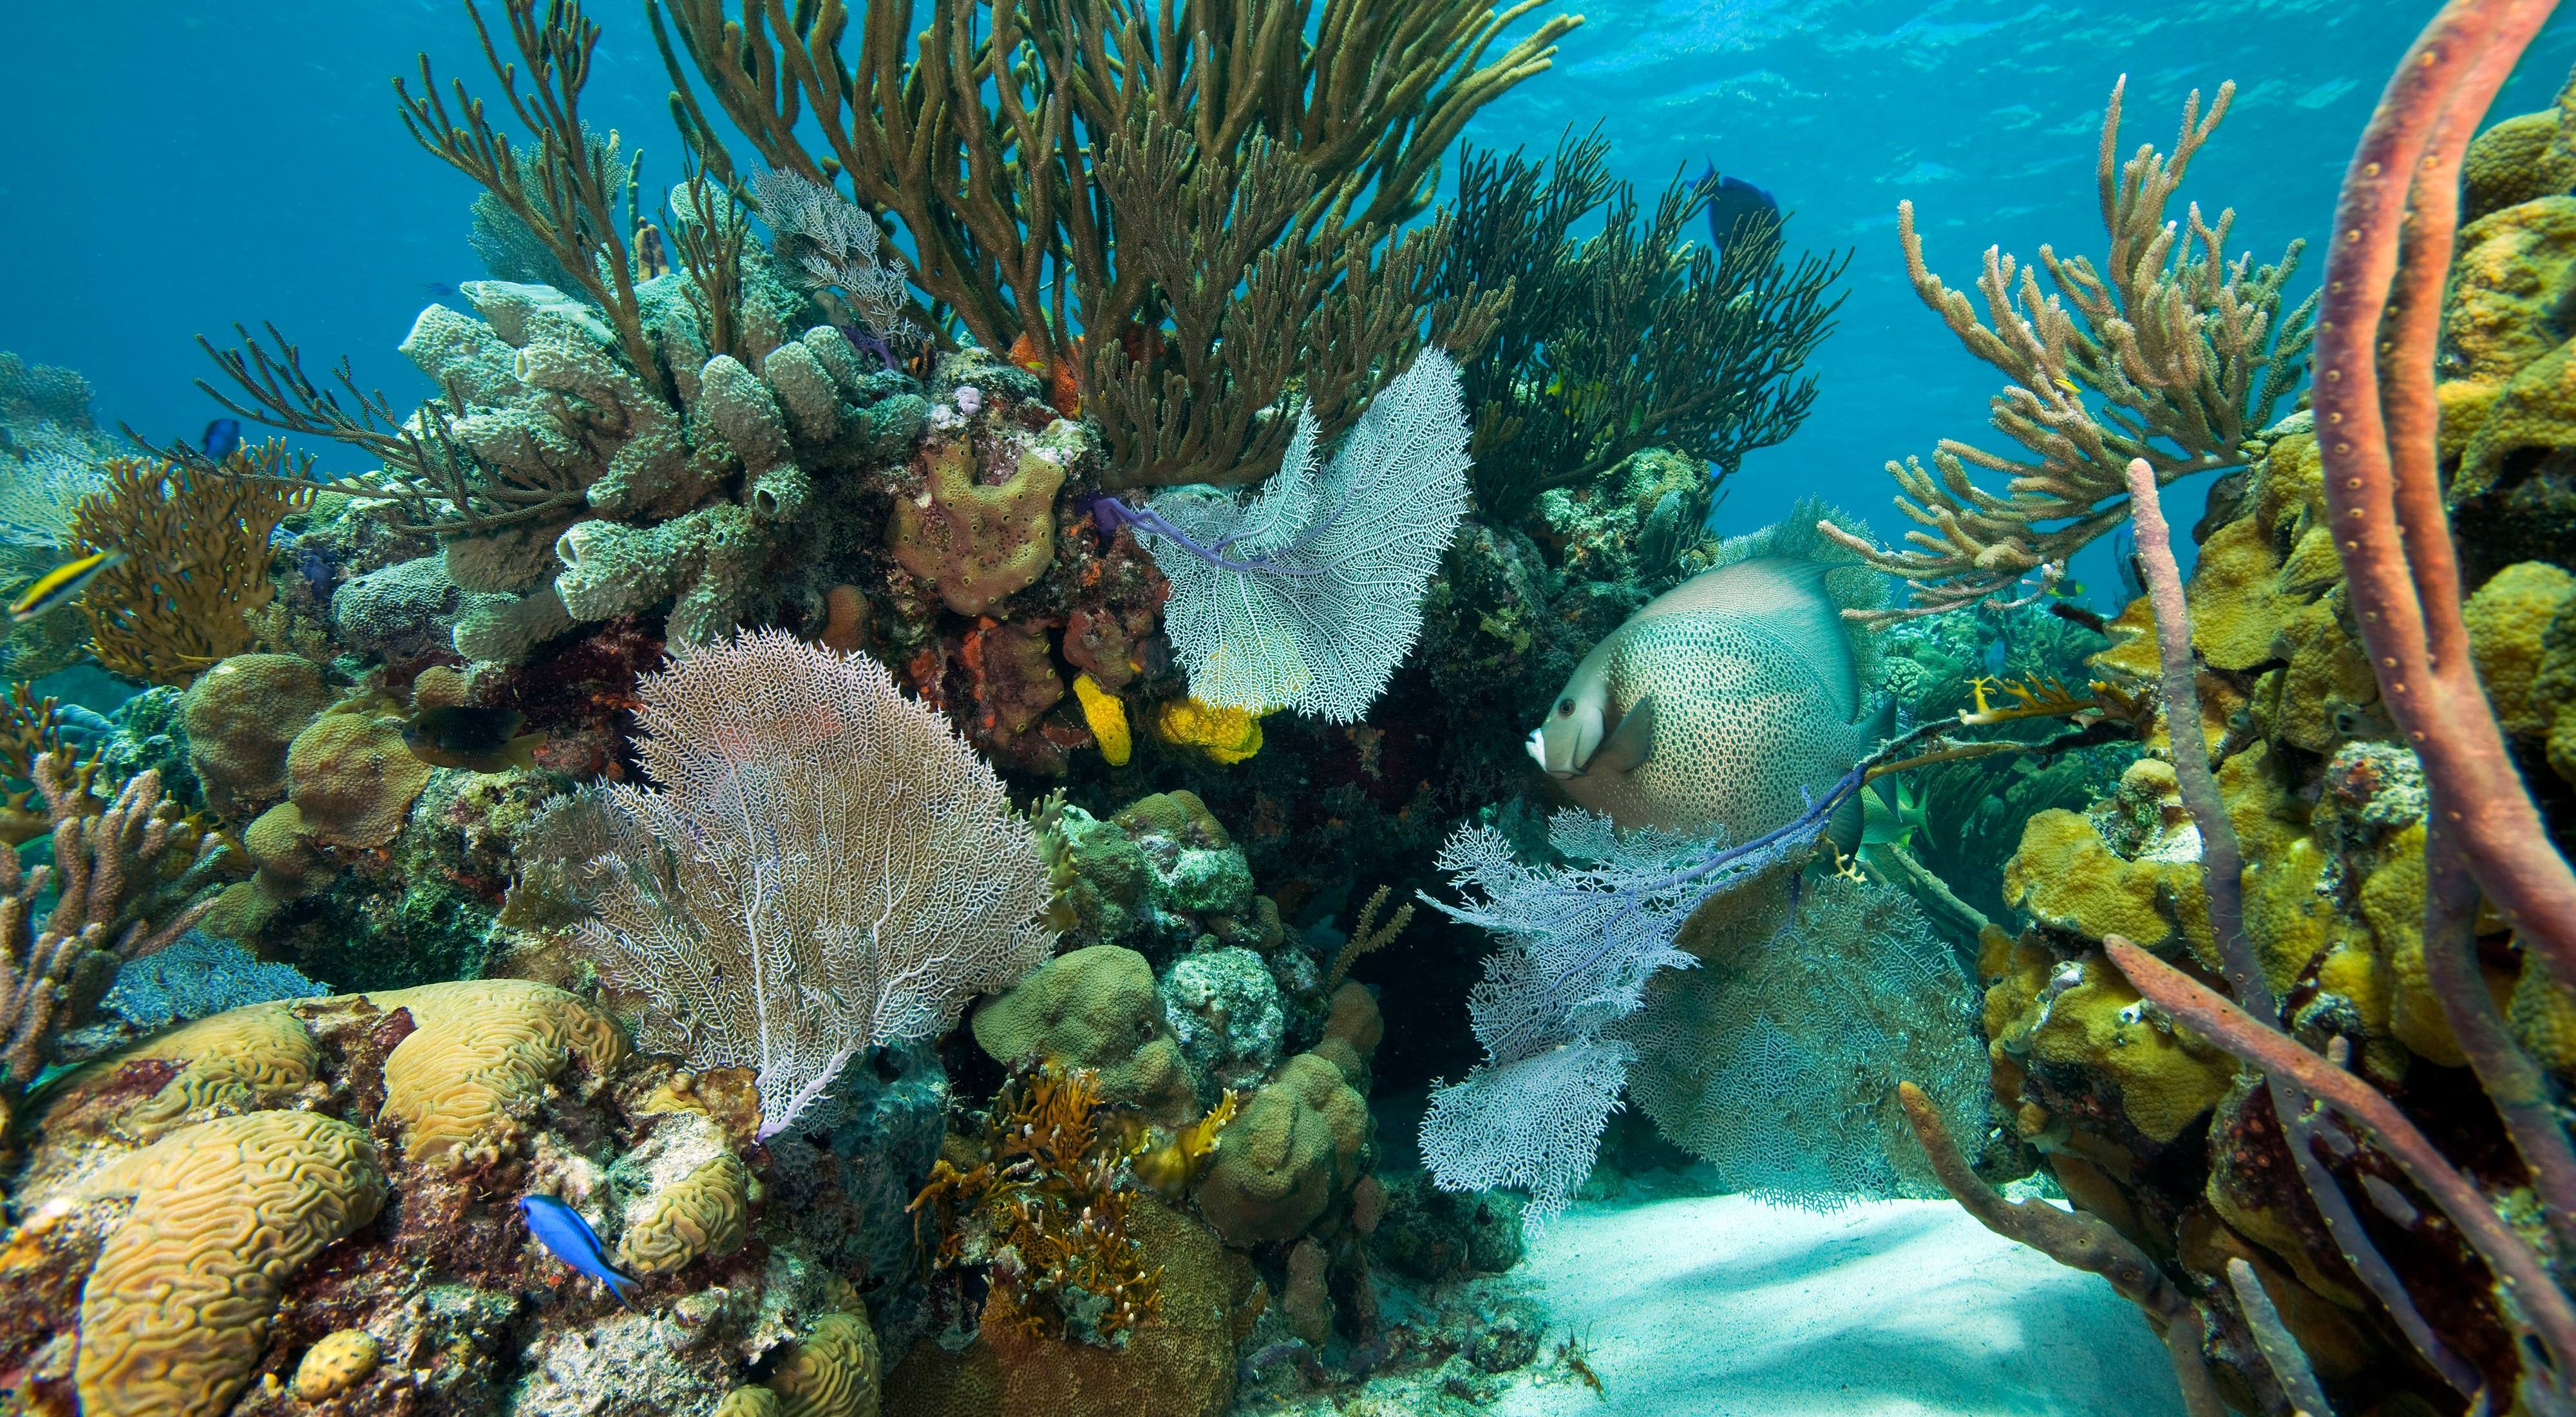 Underwater view of healthy corals in Exuma Cays, The Bahamas.